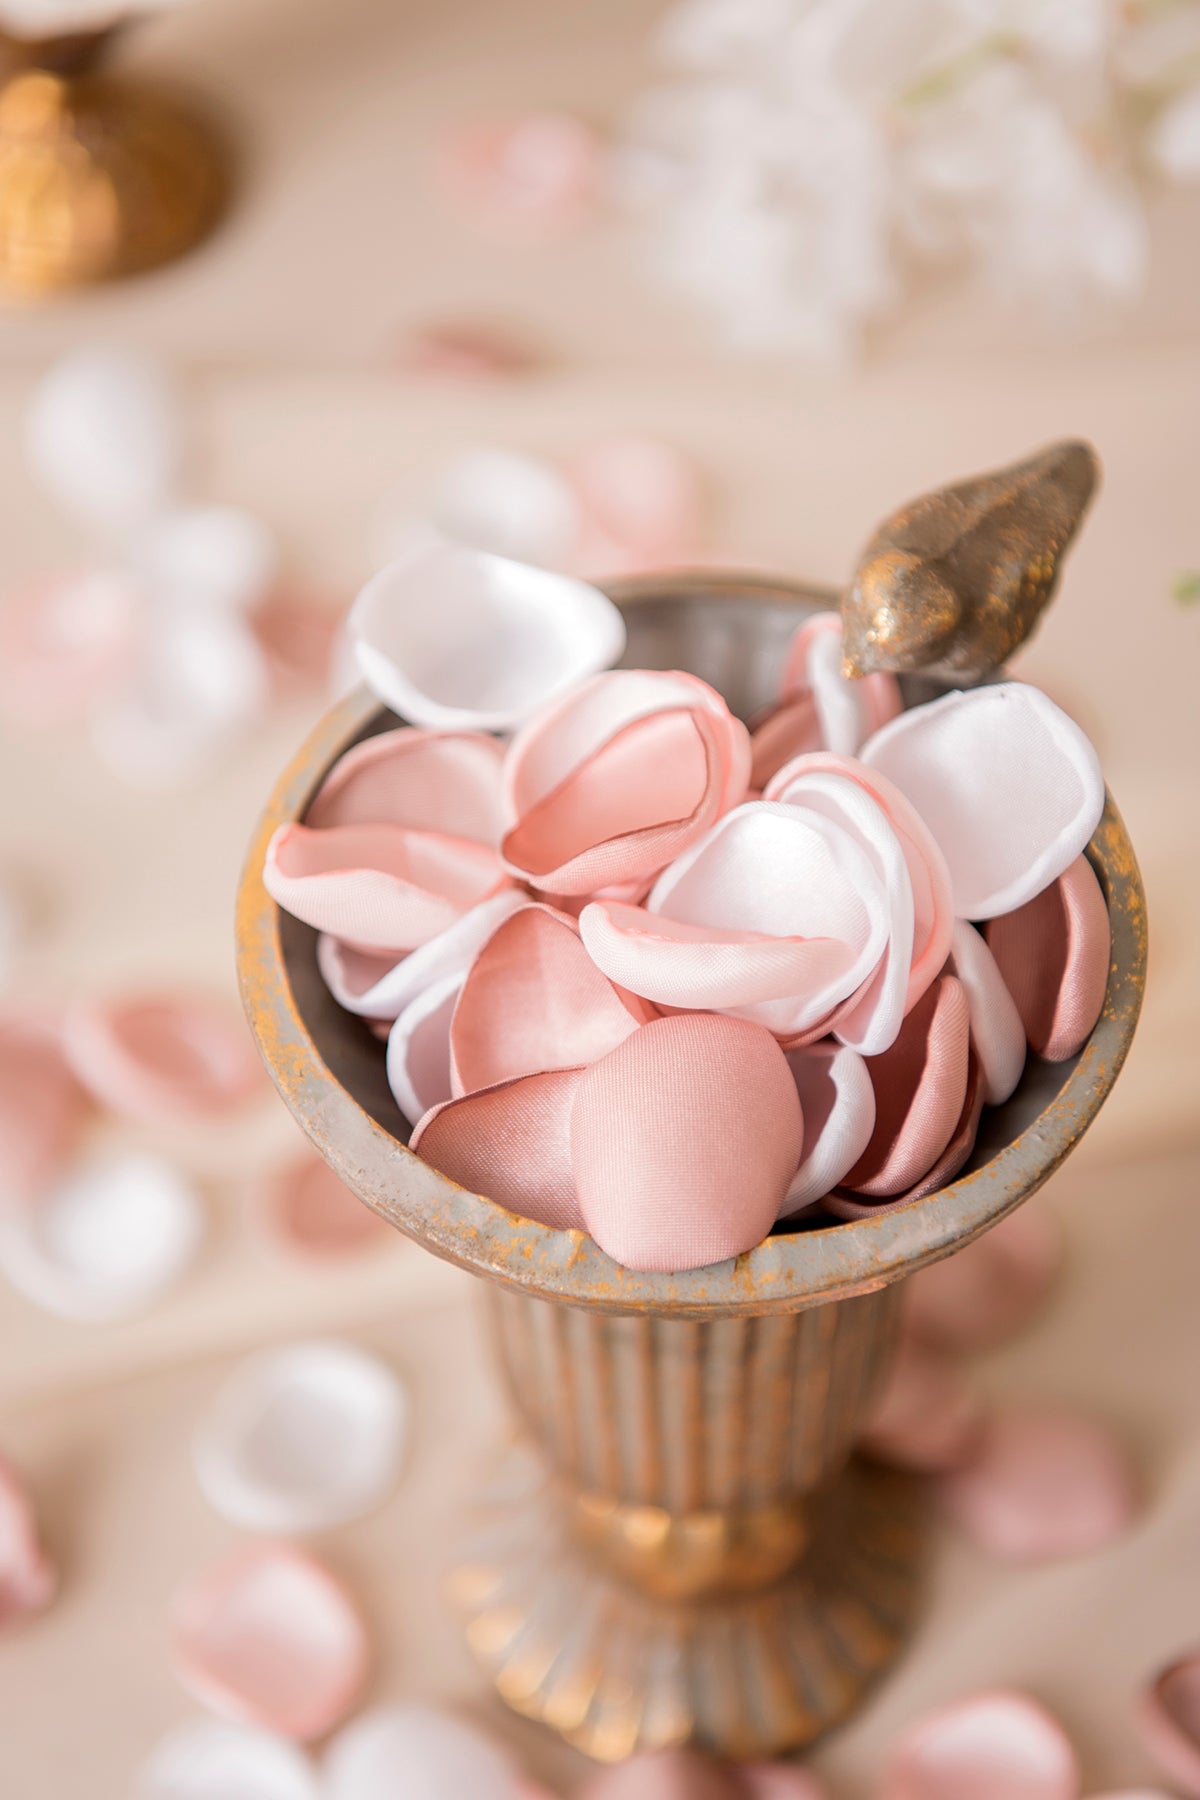 Pre-Arranged Wedding Flower Packages in Dusty Rose & Mauve